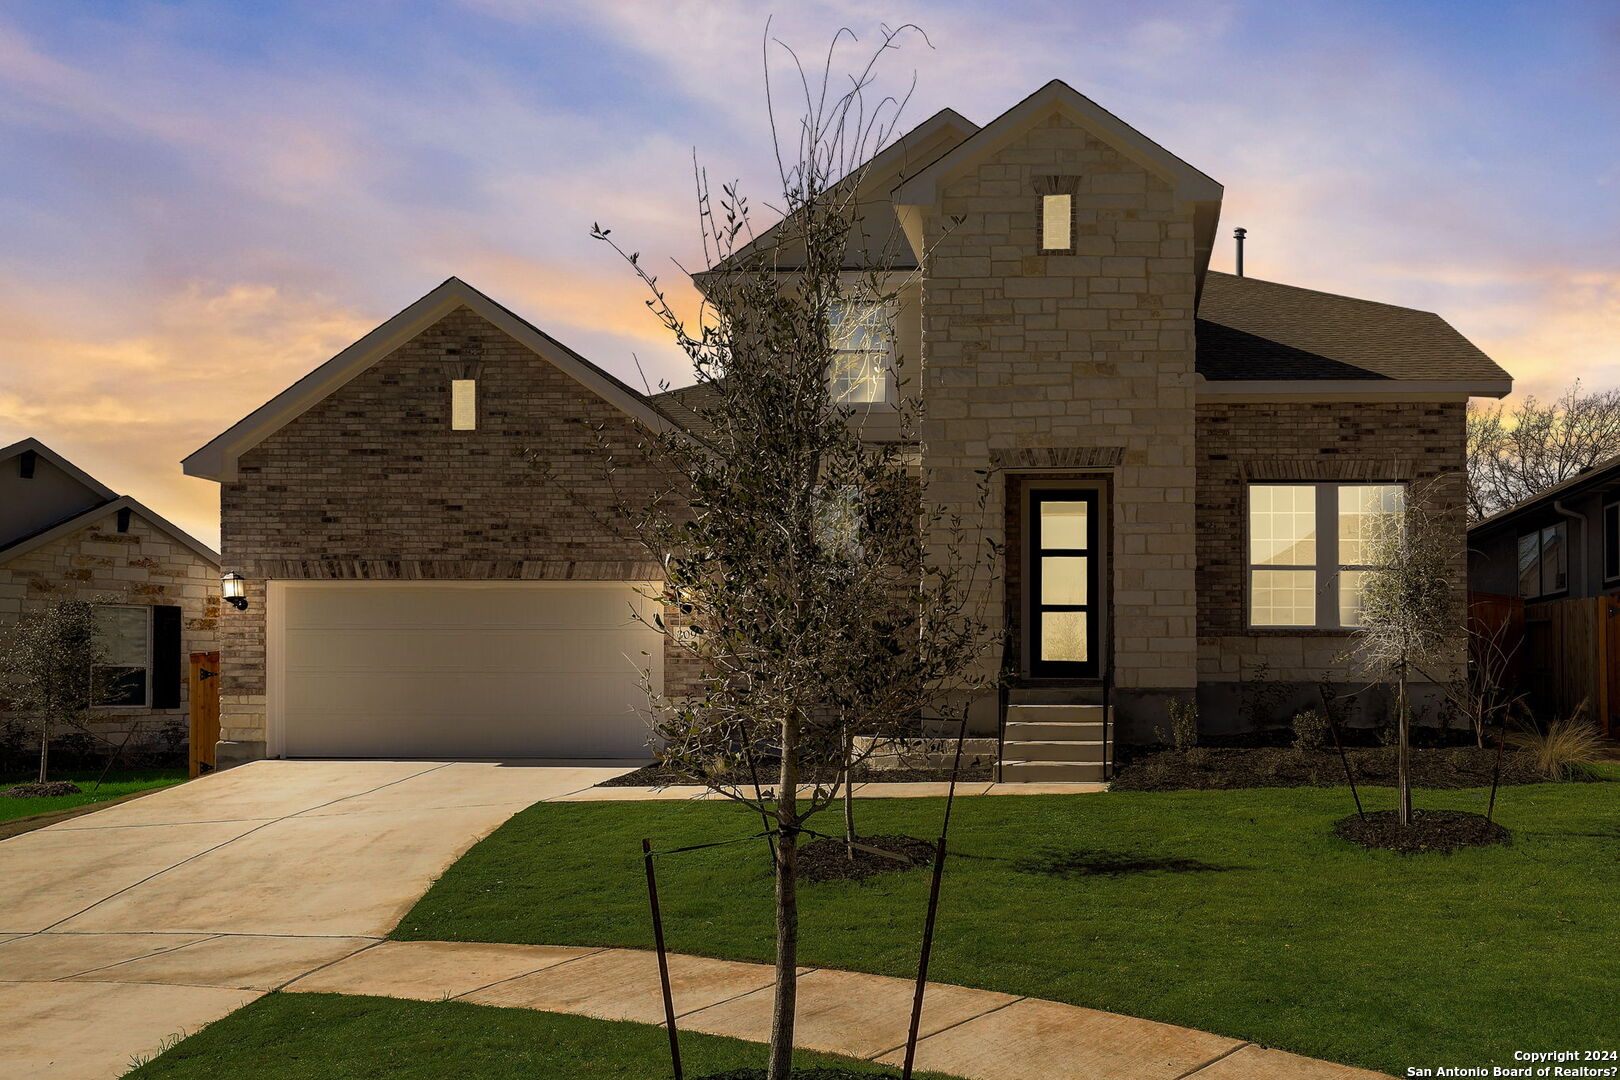 Photo of 309 Vuelo St in New Braunfels, TX